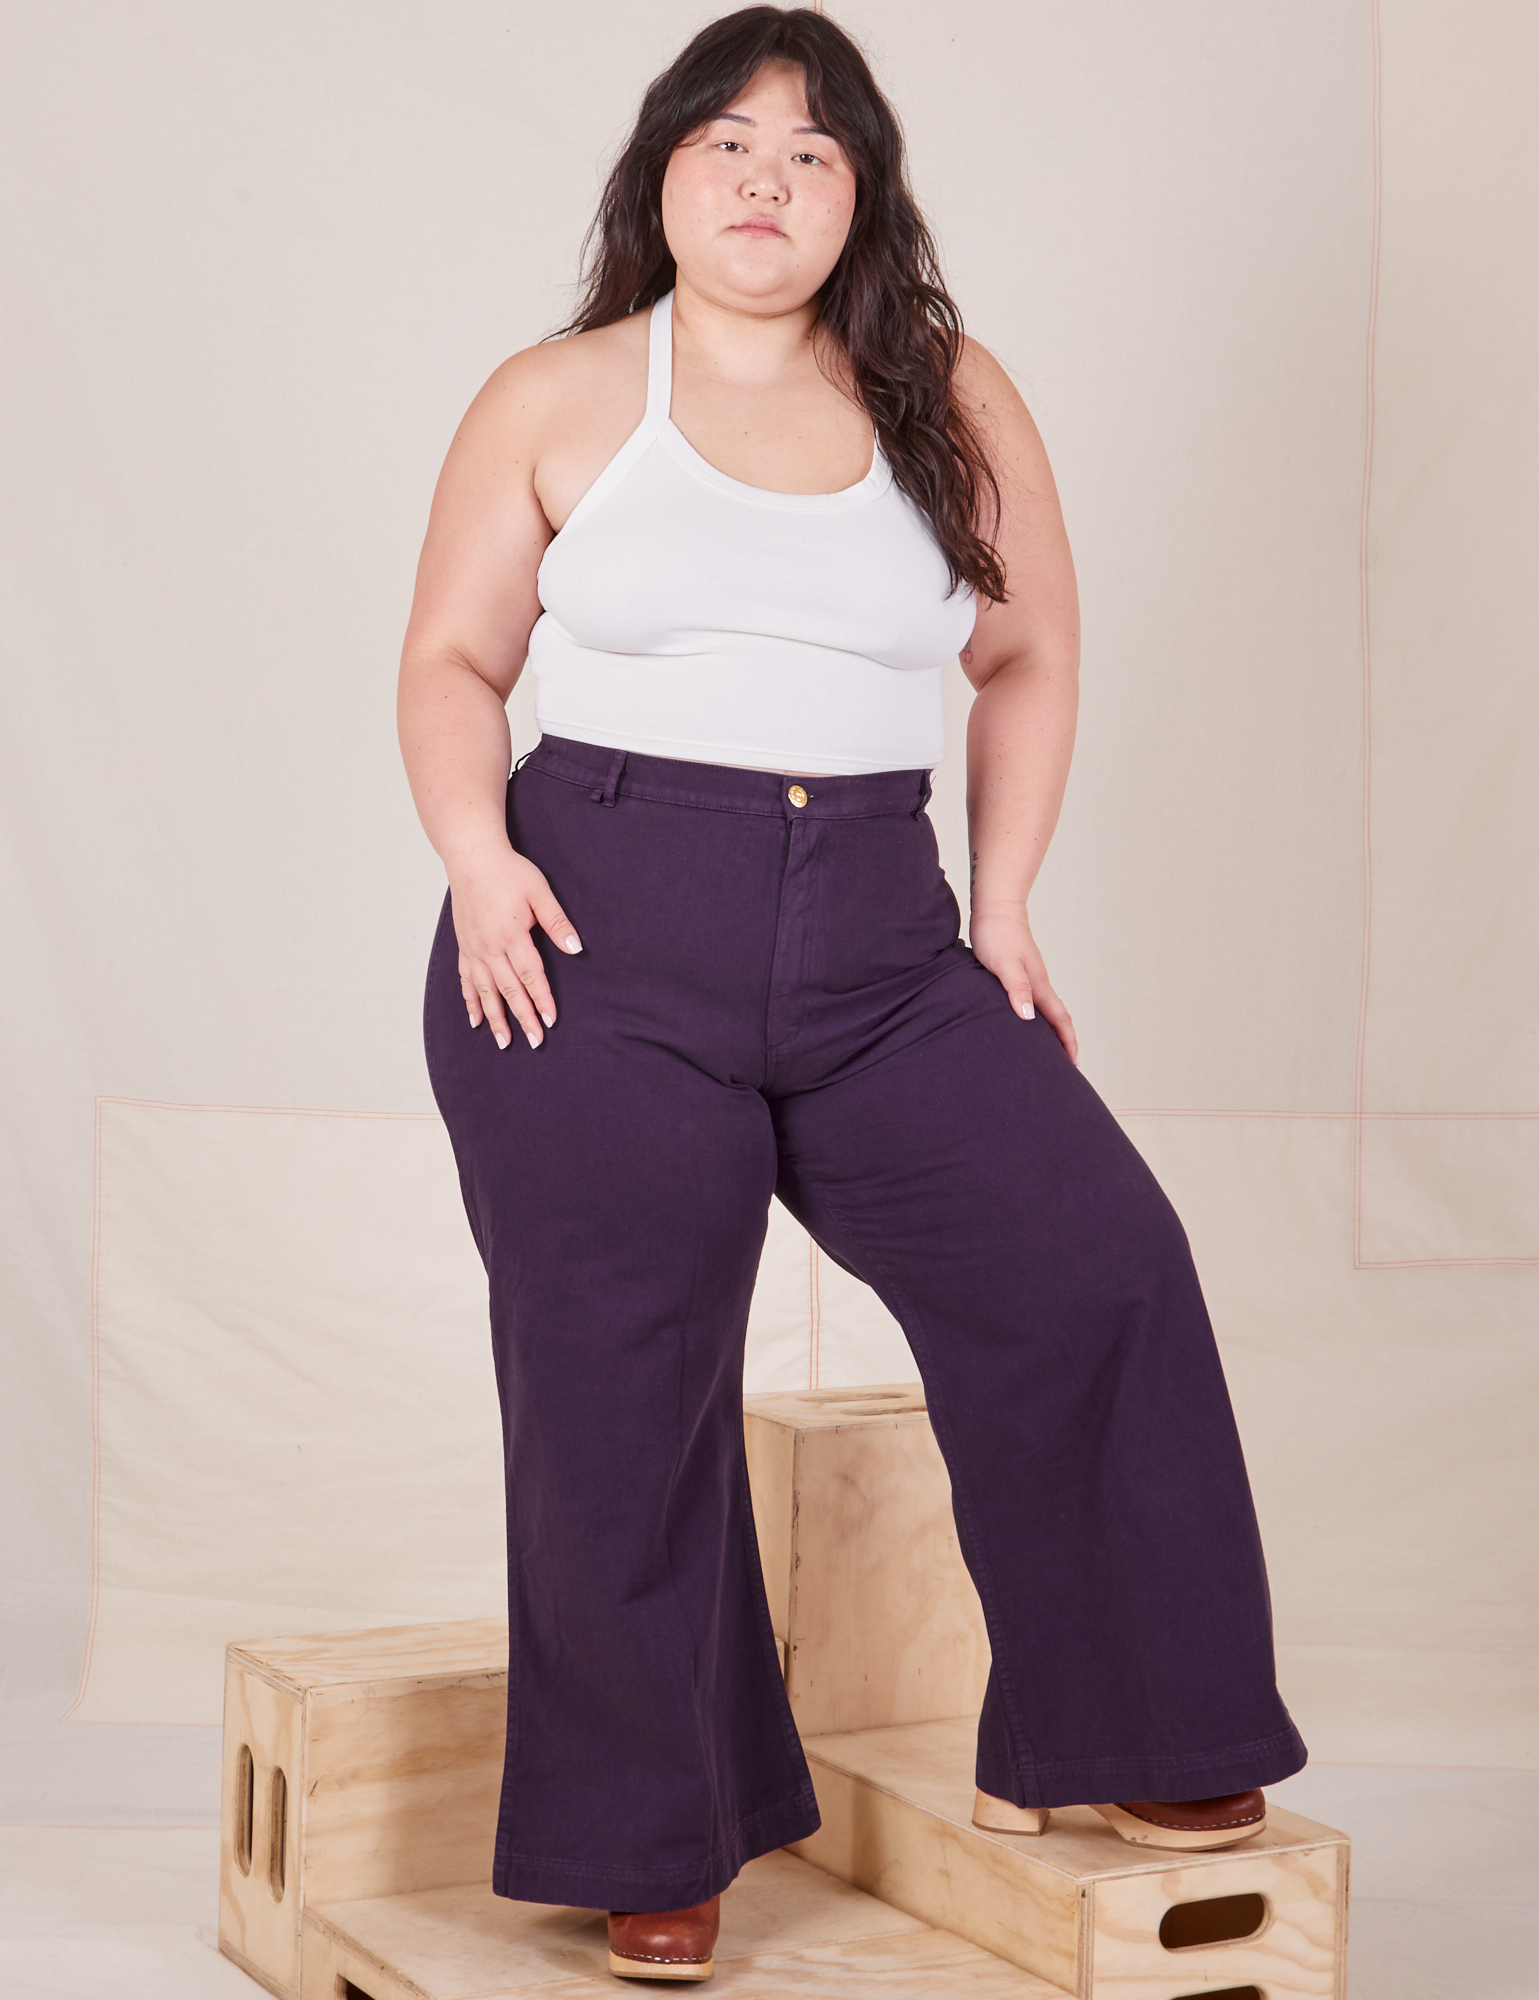 Ashley is 5&#39;7&quot; and wearing 1XL Bell Bottoms in Nebula Purple paired with vintage off-white Halter Top